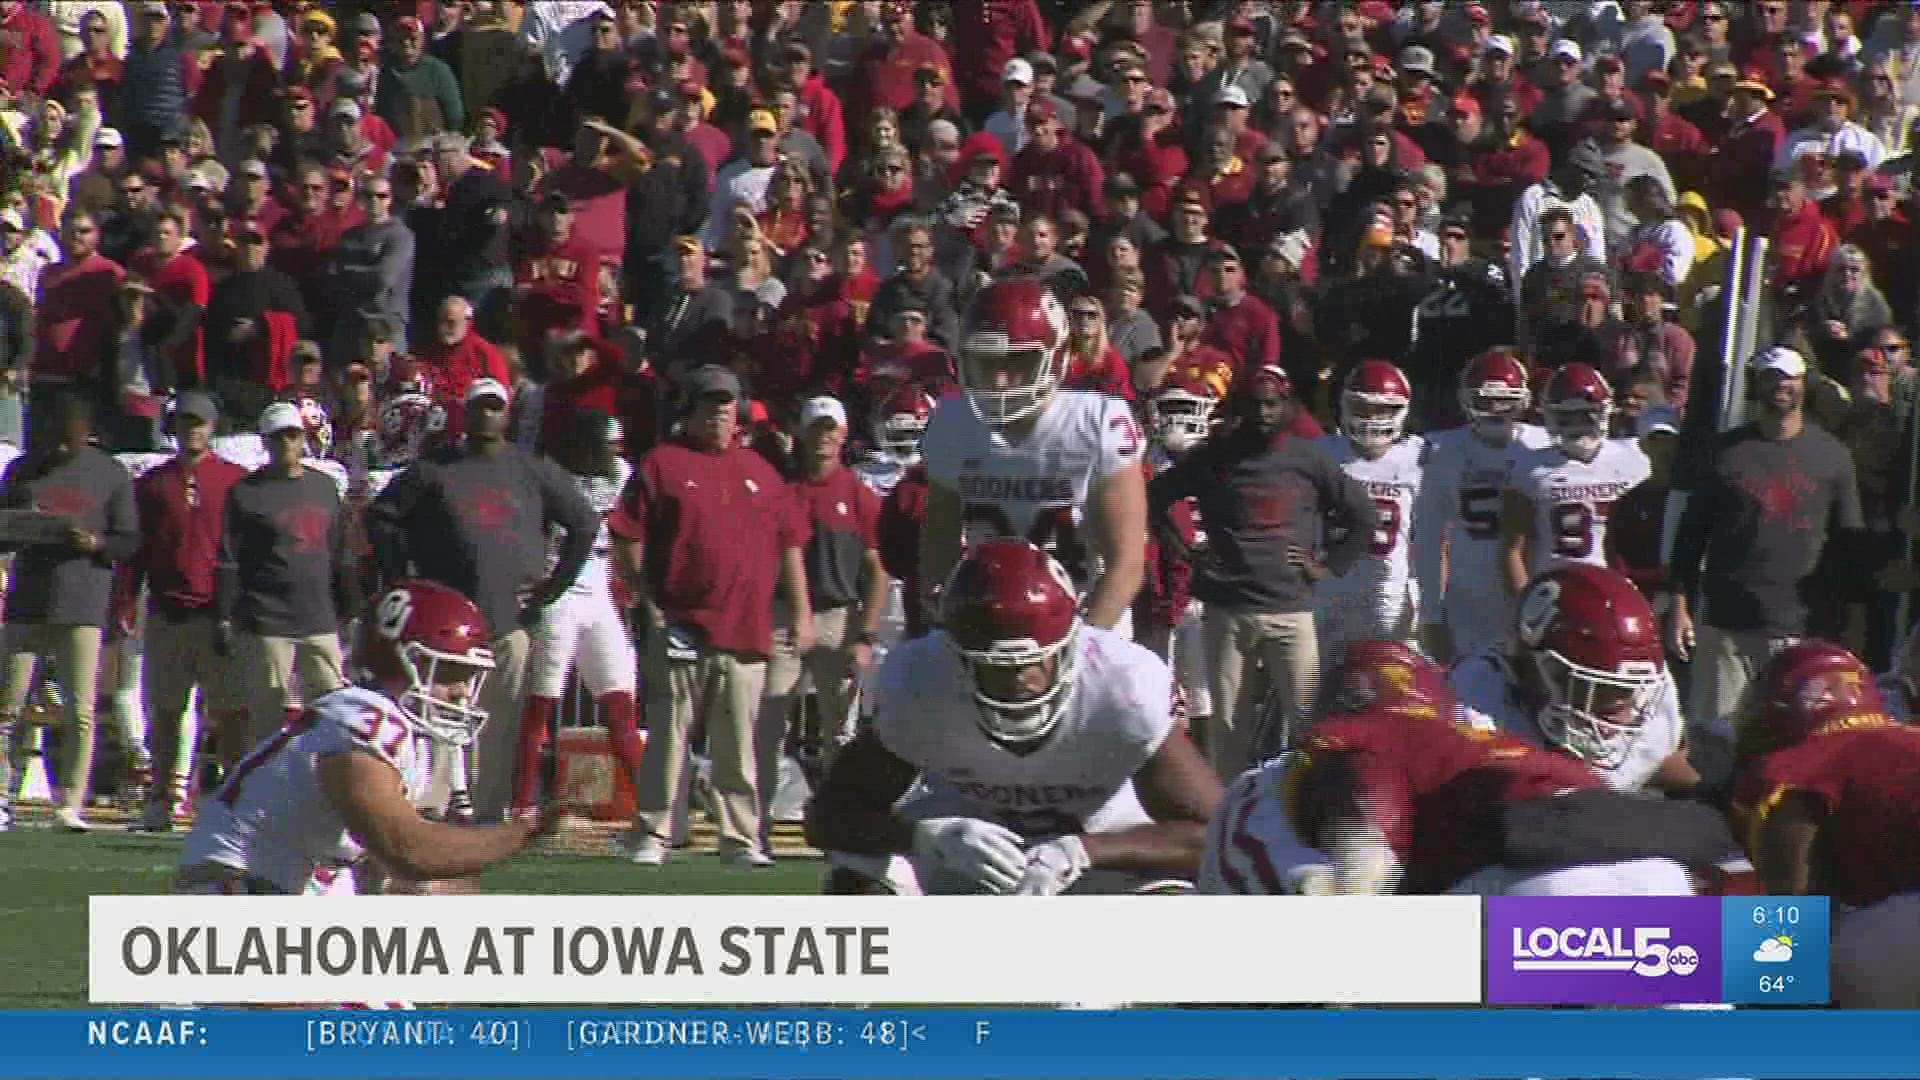 Iowa State continued their losing streak this afternoon against Oklahoma, falling to the Sooners with a final score of 27-13.